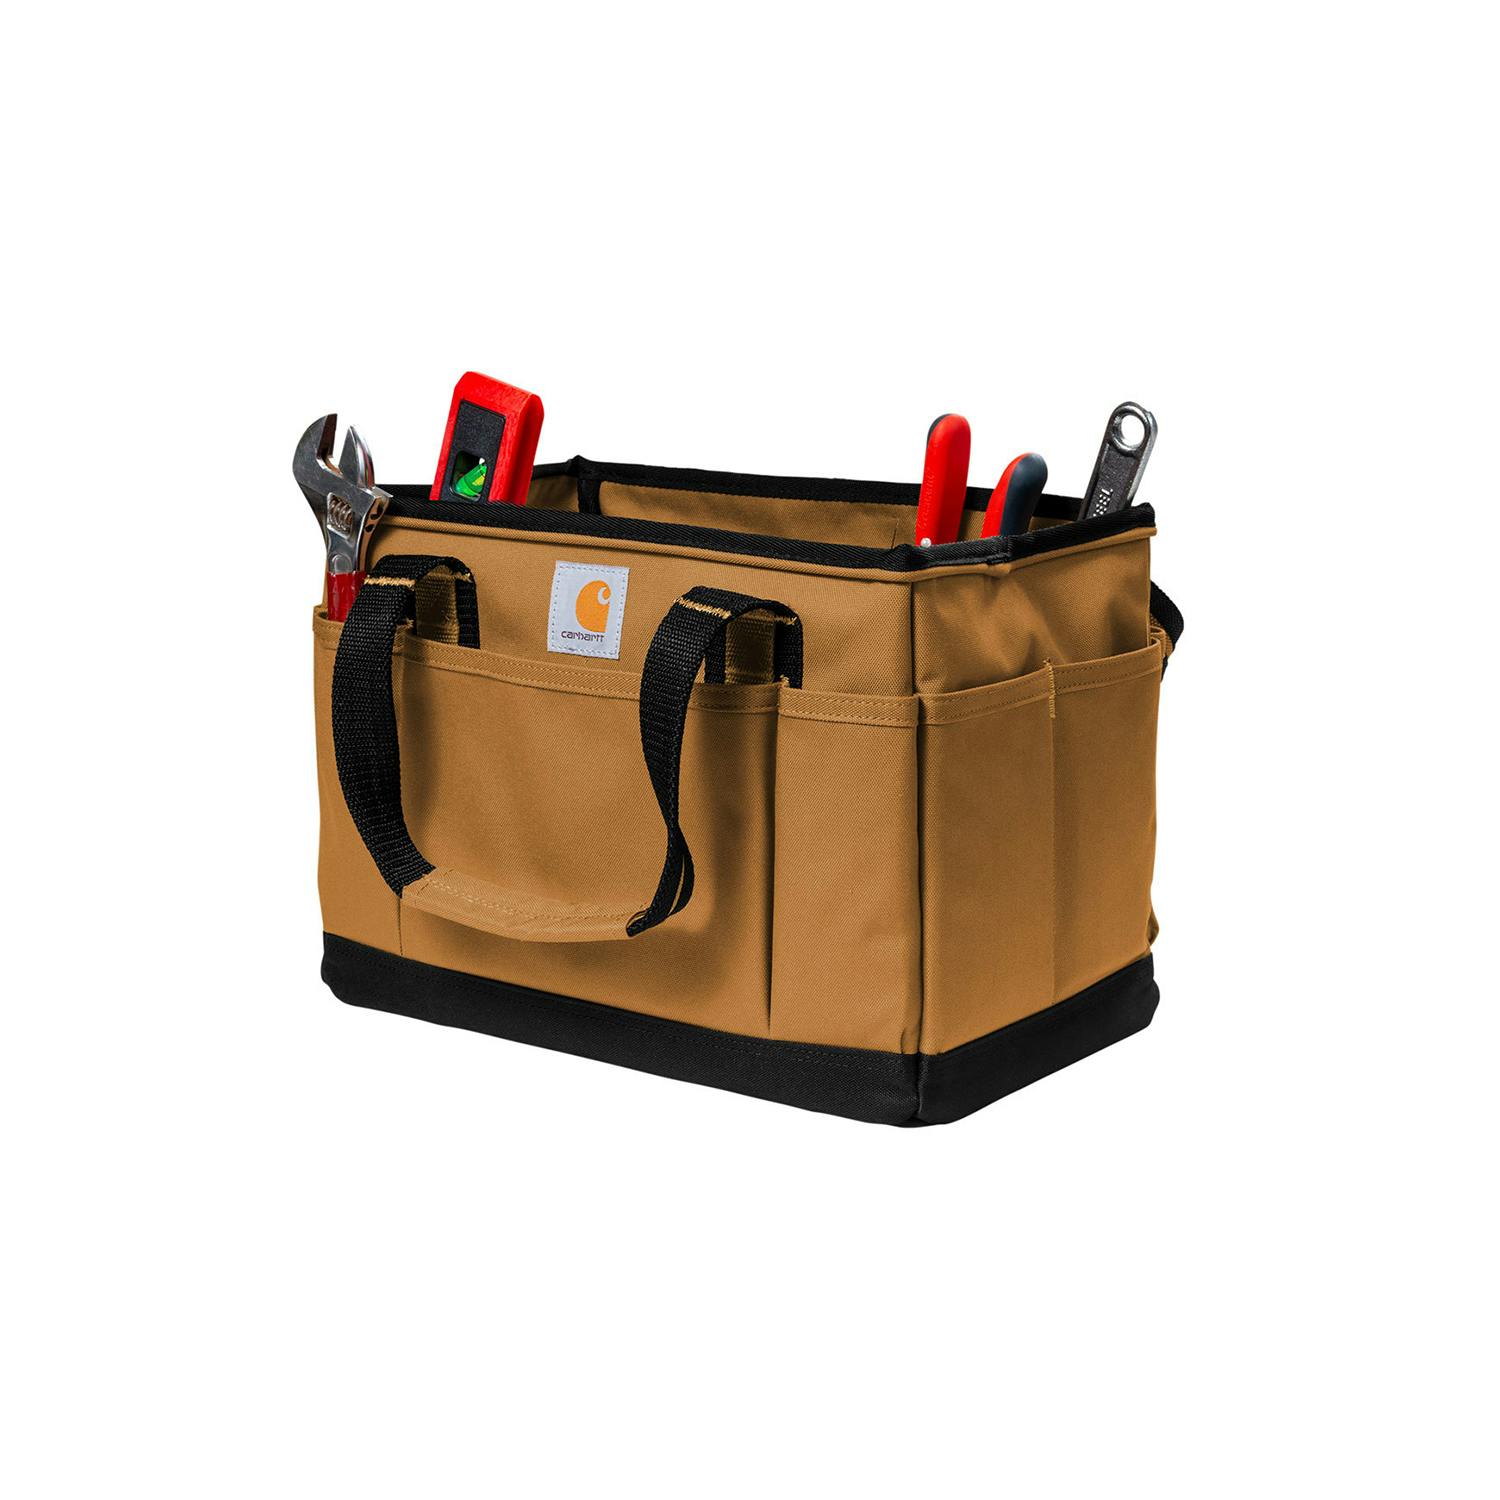 Carhartt Utility Tote Bag - additional Image 4